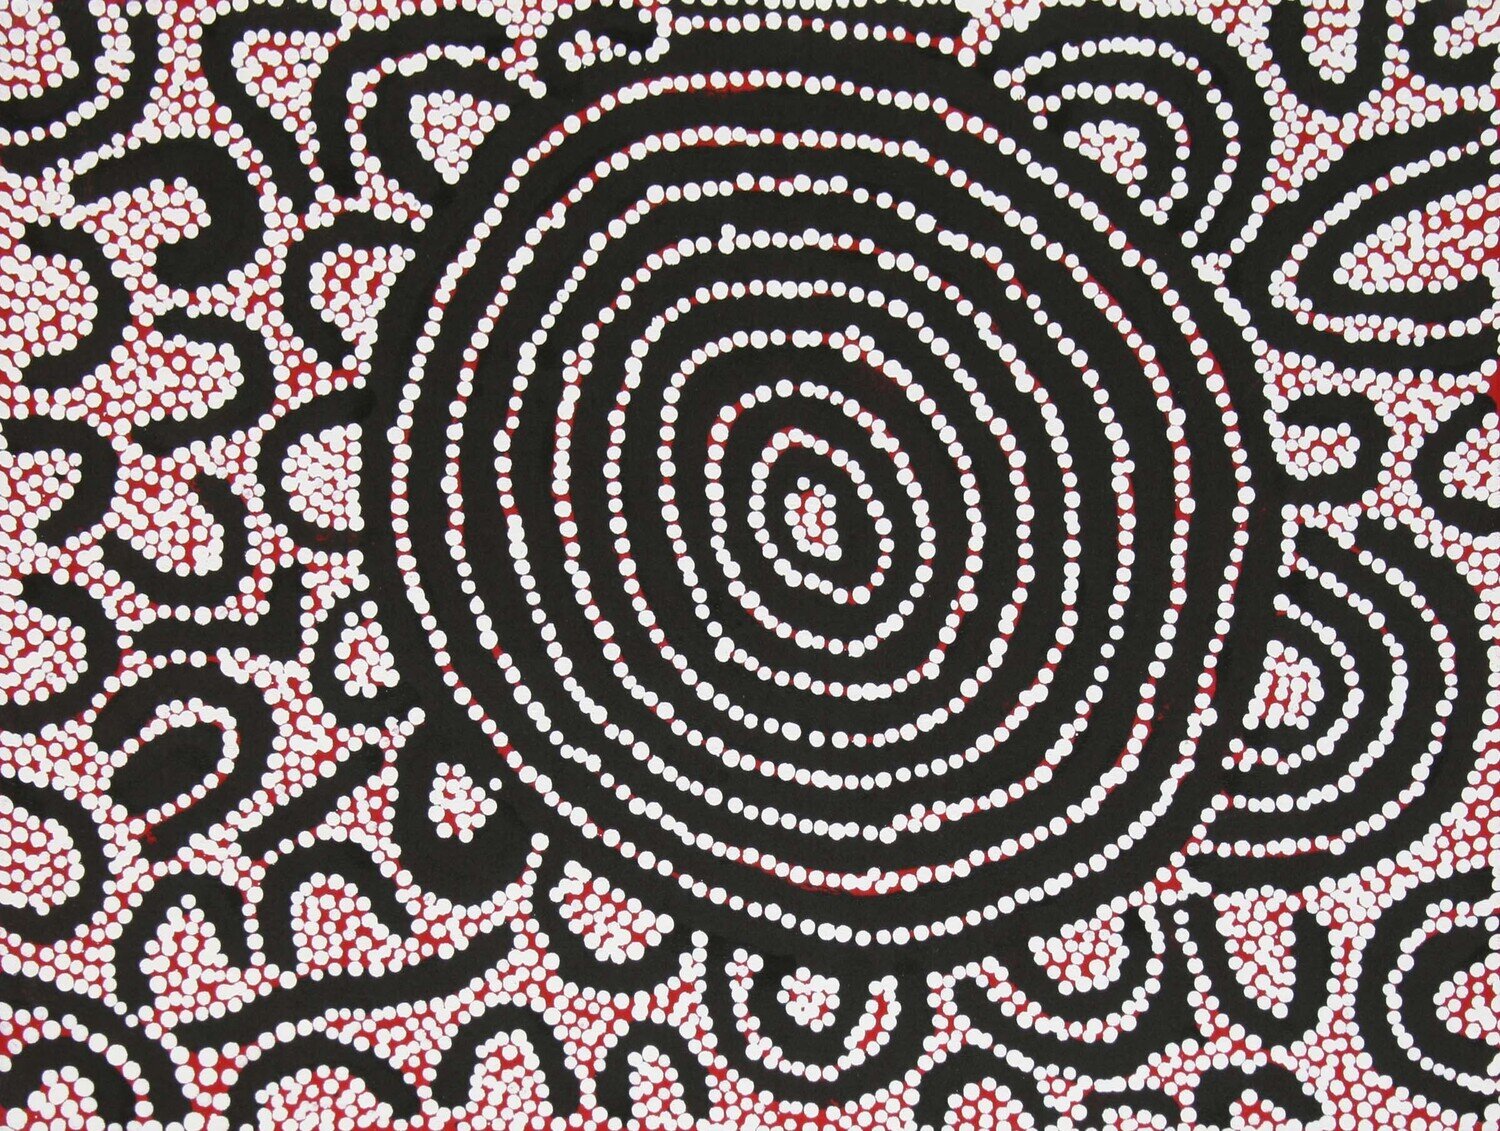 Tingari Cycle, 2006 by Barney Campbell Tjakamarra 41x61cm Cat 9509BC